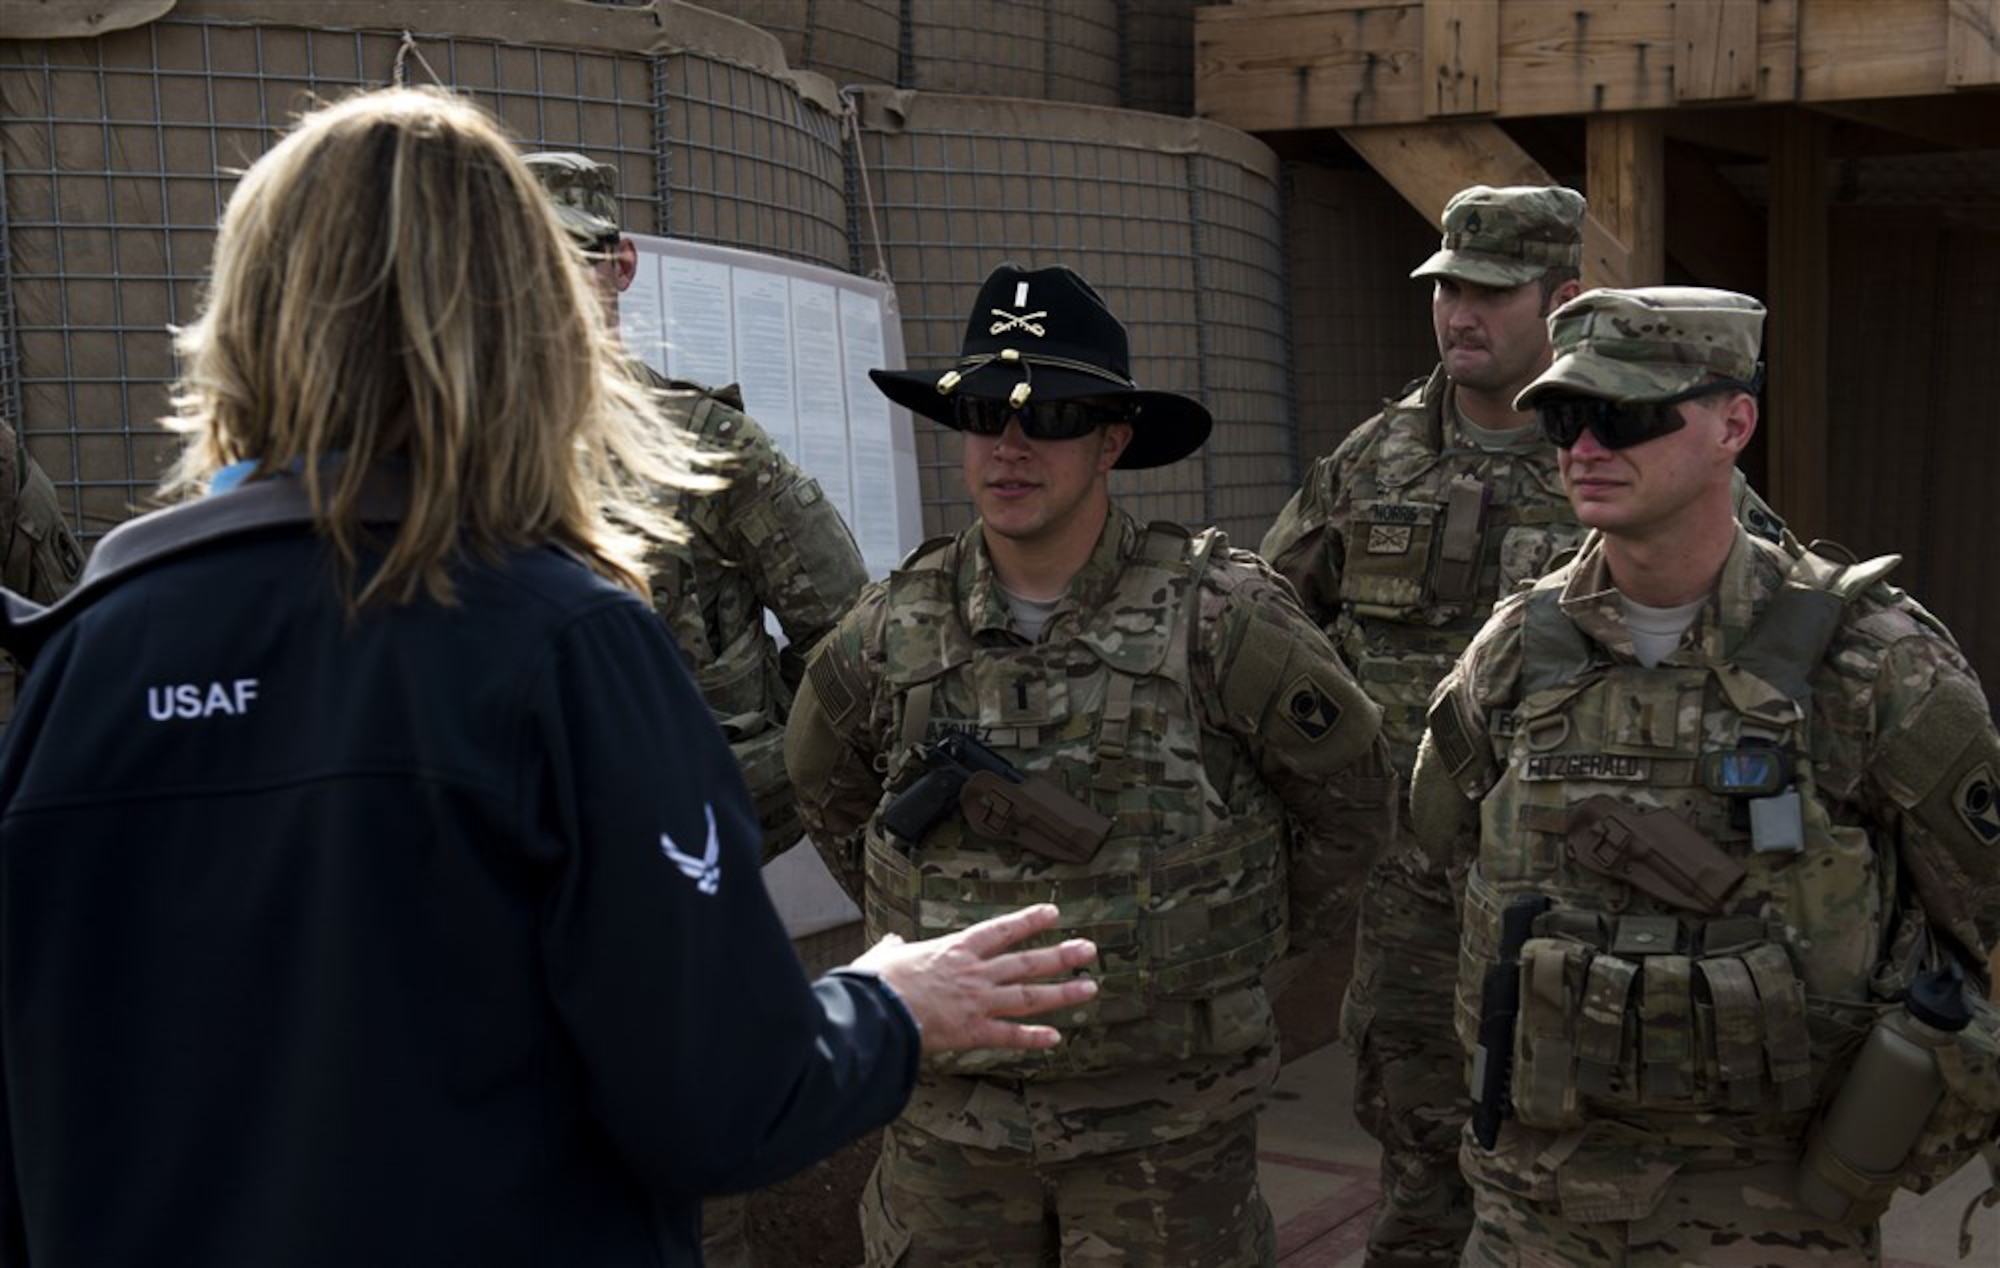 Secretary of the Air Force Deborah Lee James speaks with Soldiers assigned to Chebelley Airfield, Djibouiti, Nov. 12, 2015. James visited members of the Air Force, Army and Navy to discuss their unique assignments and learn about the impact they have on operations around the globe. (U.S. Air Force photo/Senior Airman Peter Thompson)